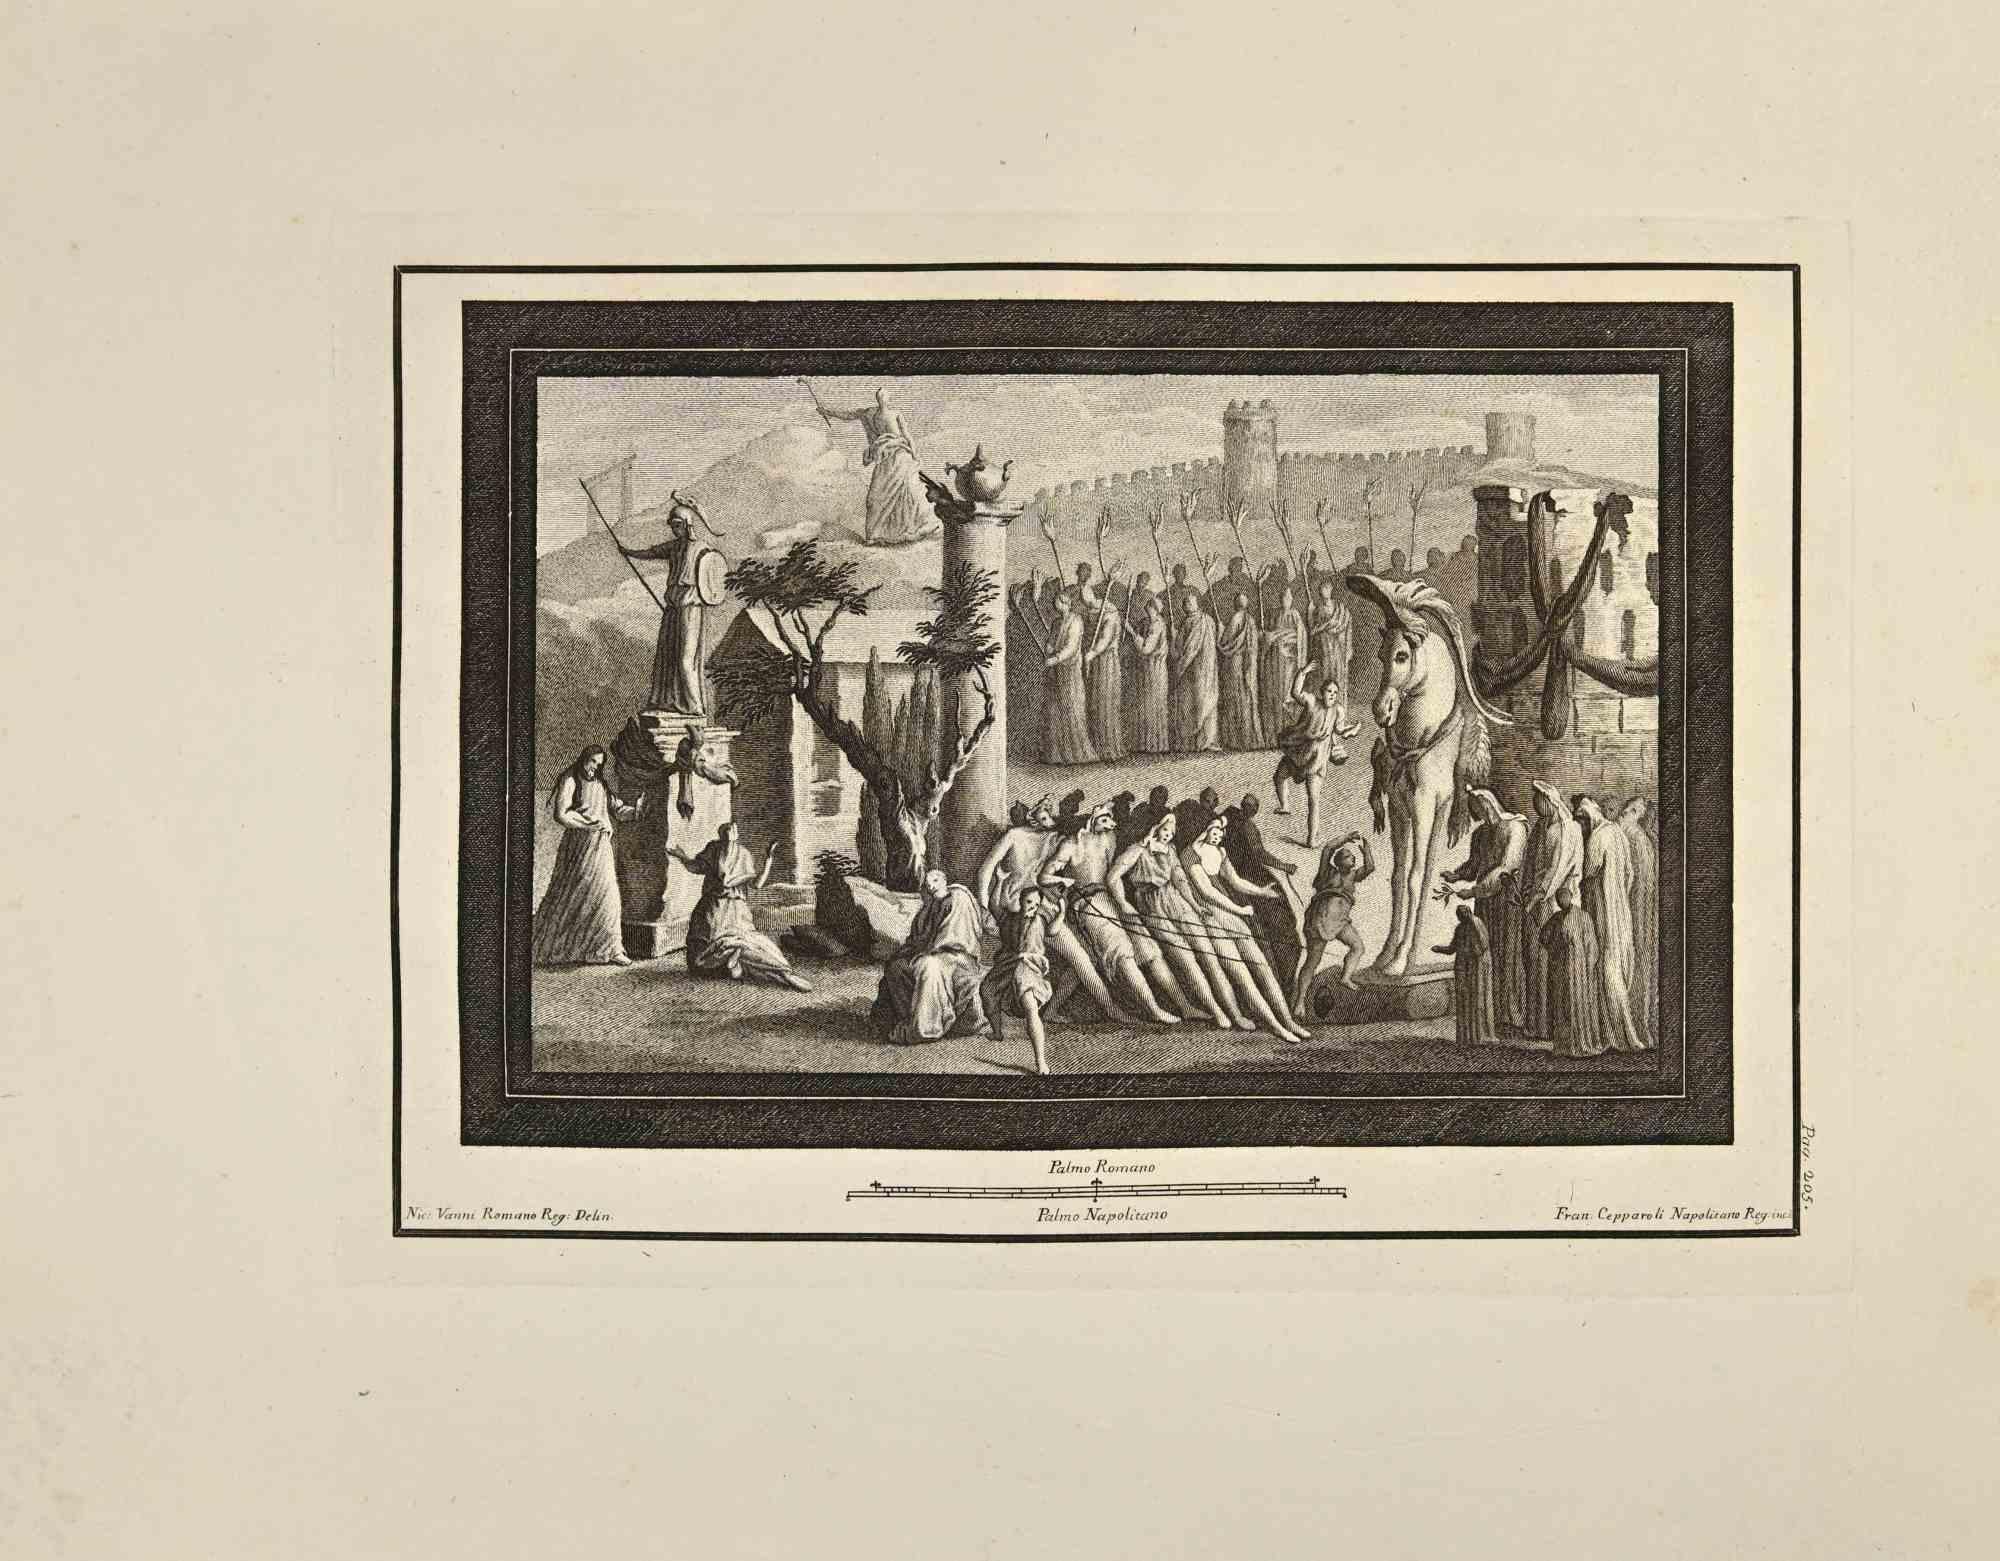 Victory In Roman Empire Fresco from "Antiquities of Herculaneum" is an etching on paper realized by Francesco Cepparoli in the 18th Century.

Signed on the plate.

Good conditions with some folding.

The etching belongs to the print suite